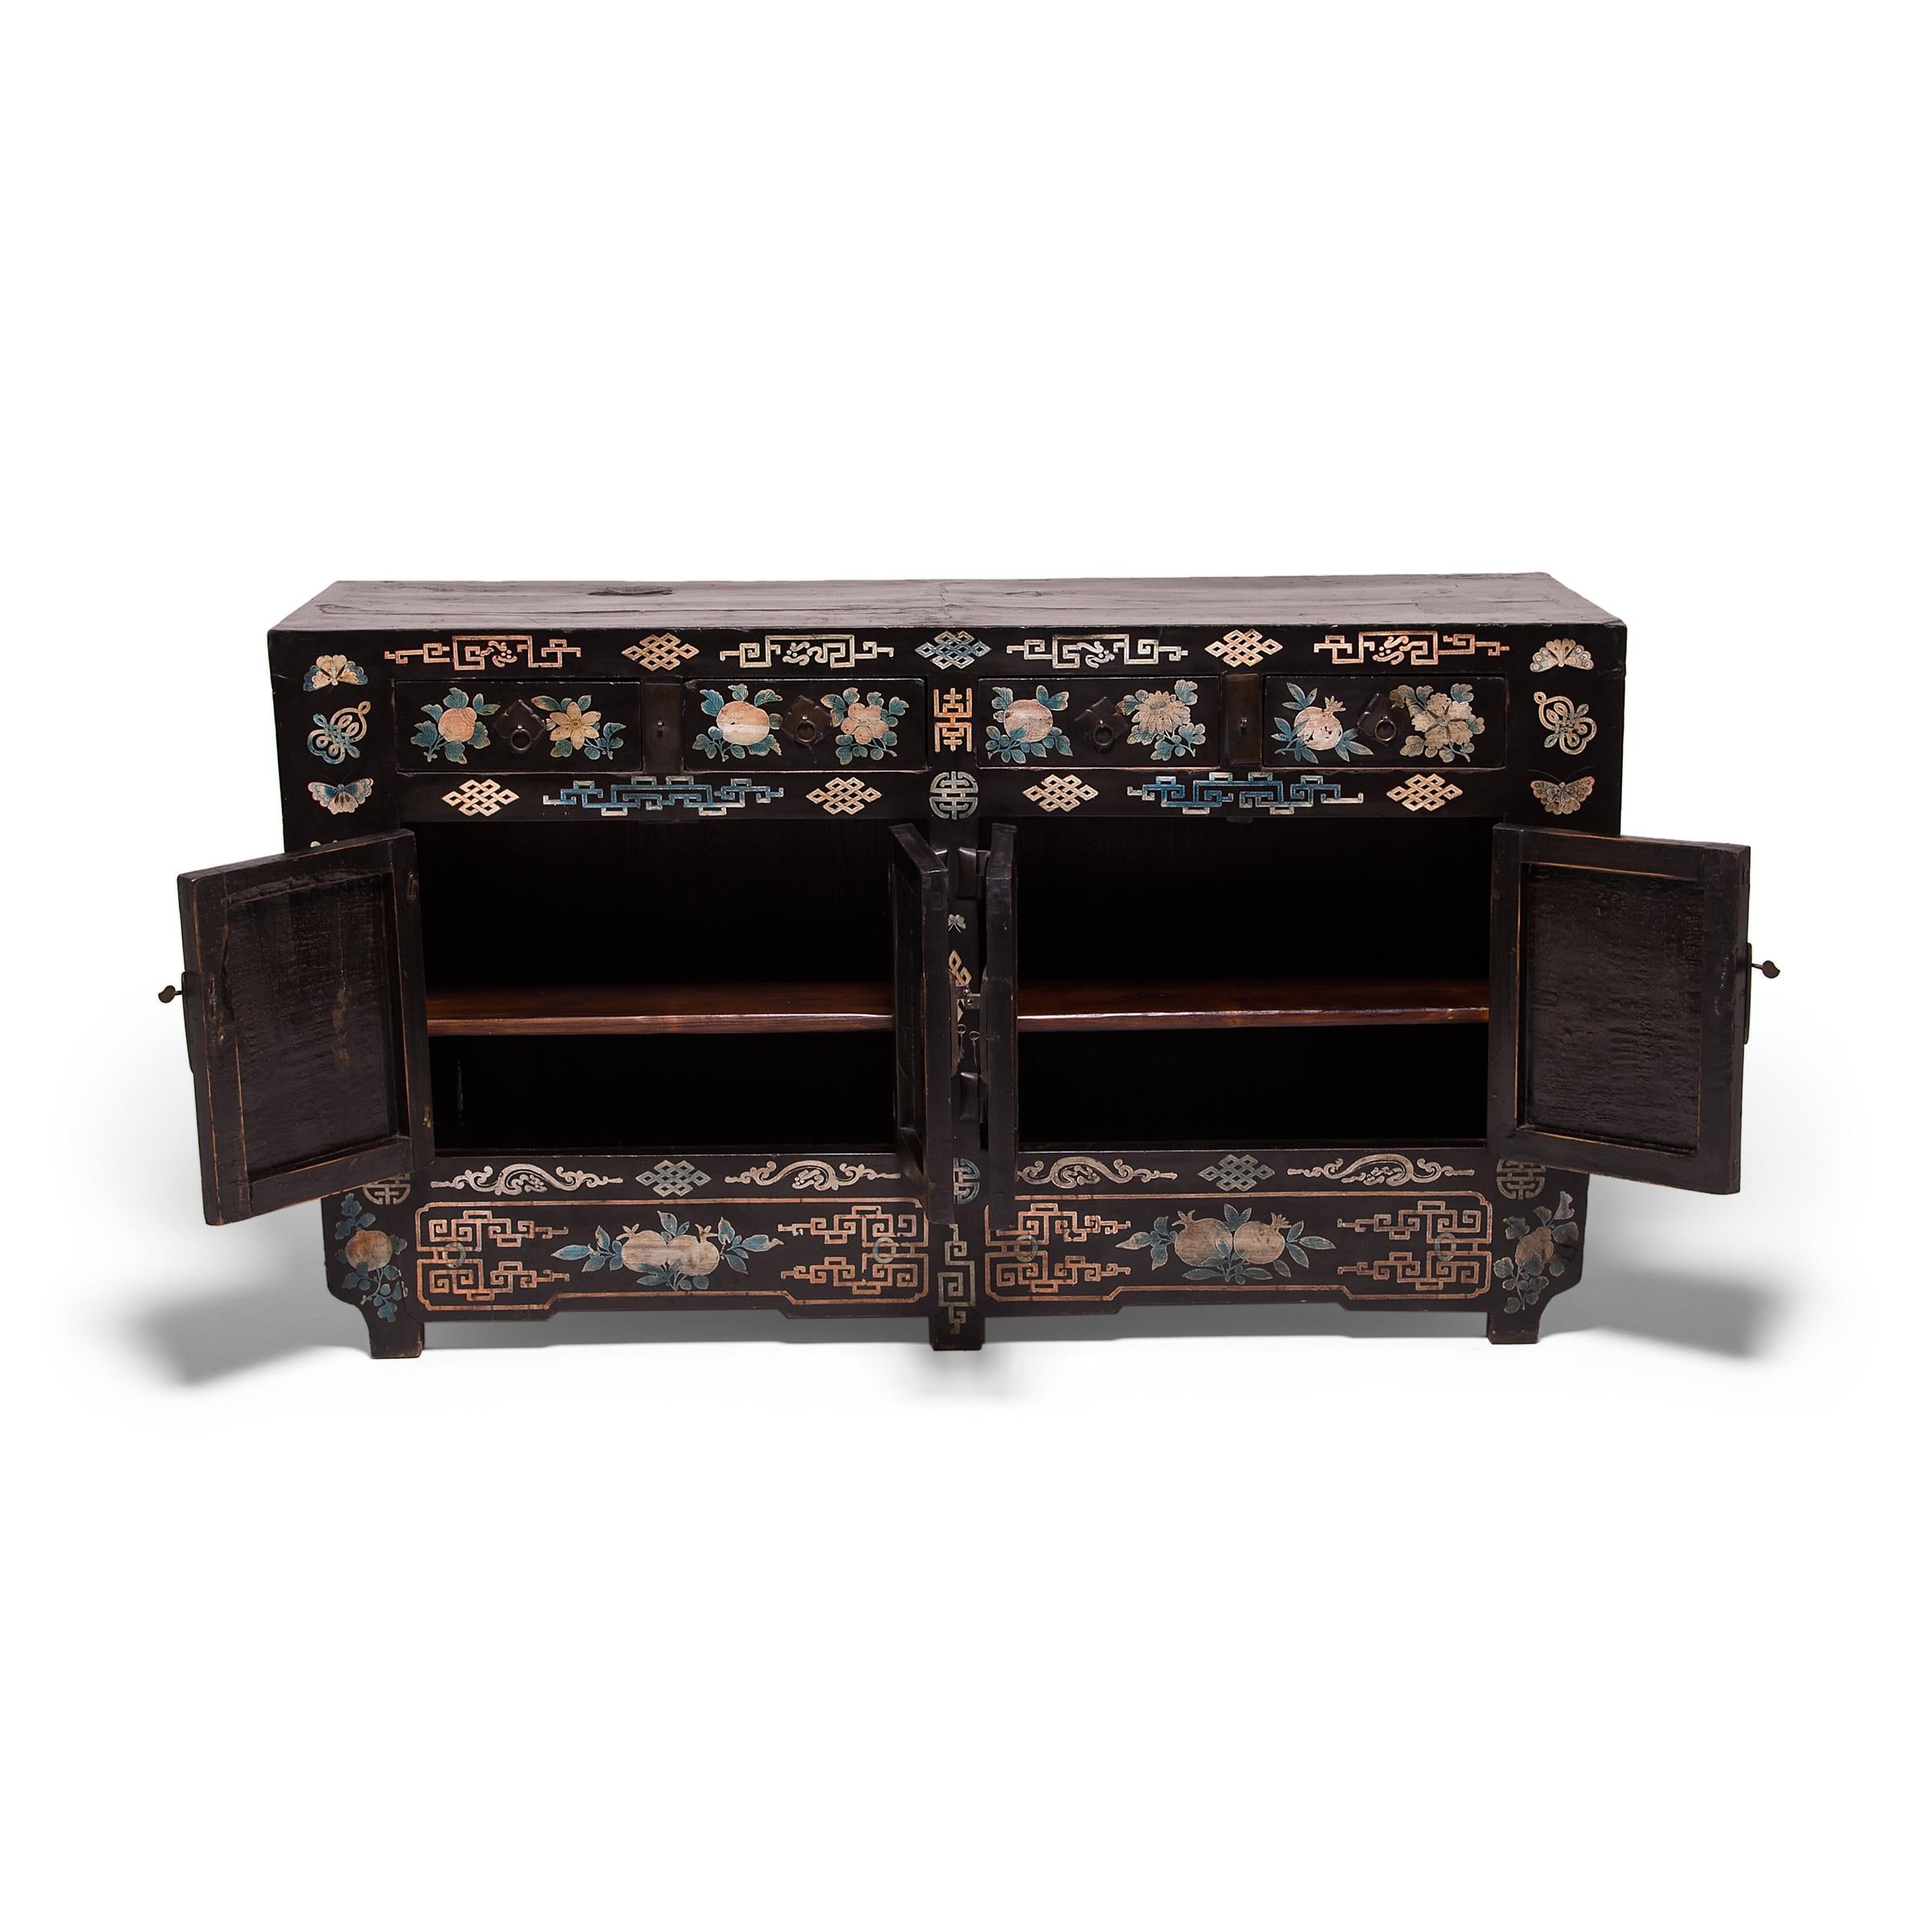 Crafted by an artisan in China's Shanxi province, this spirited 19th century coffer would have been kept in the home as a blessing of luck and good fortune. The beautifully maintained and ornate folk paintings covering the cabinet depict all things